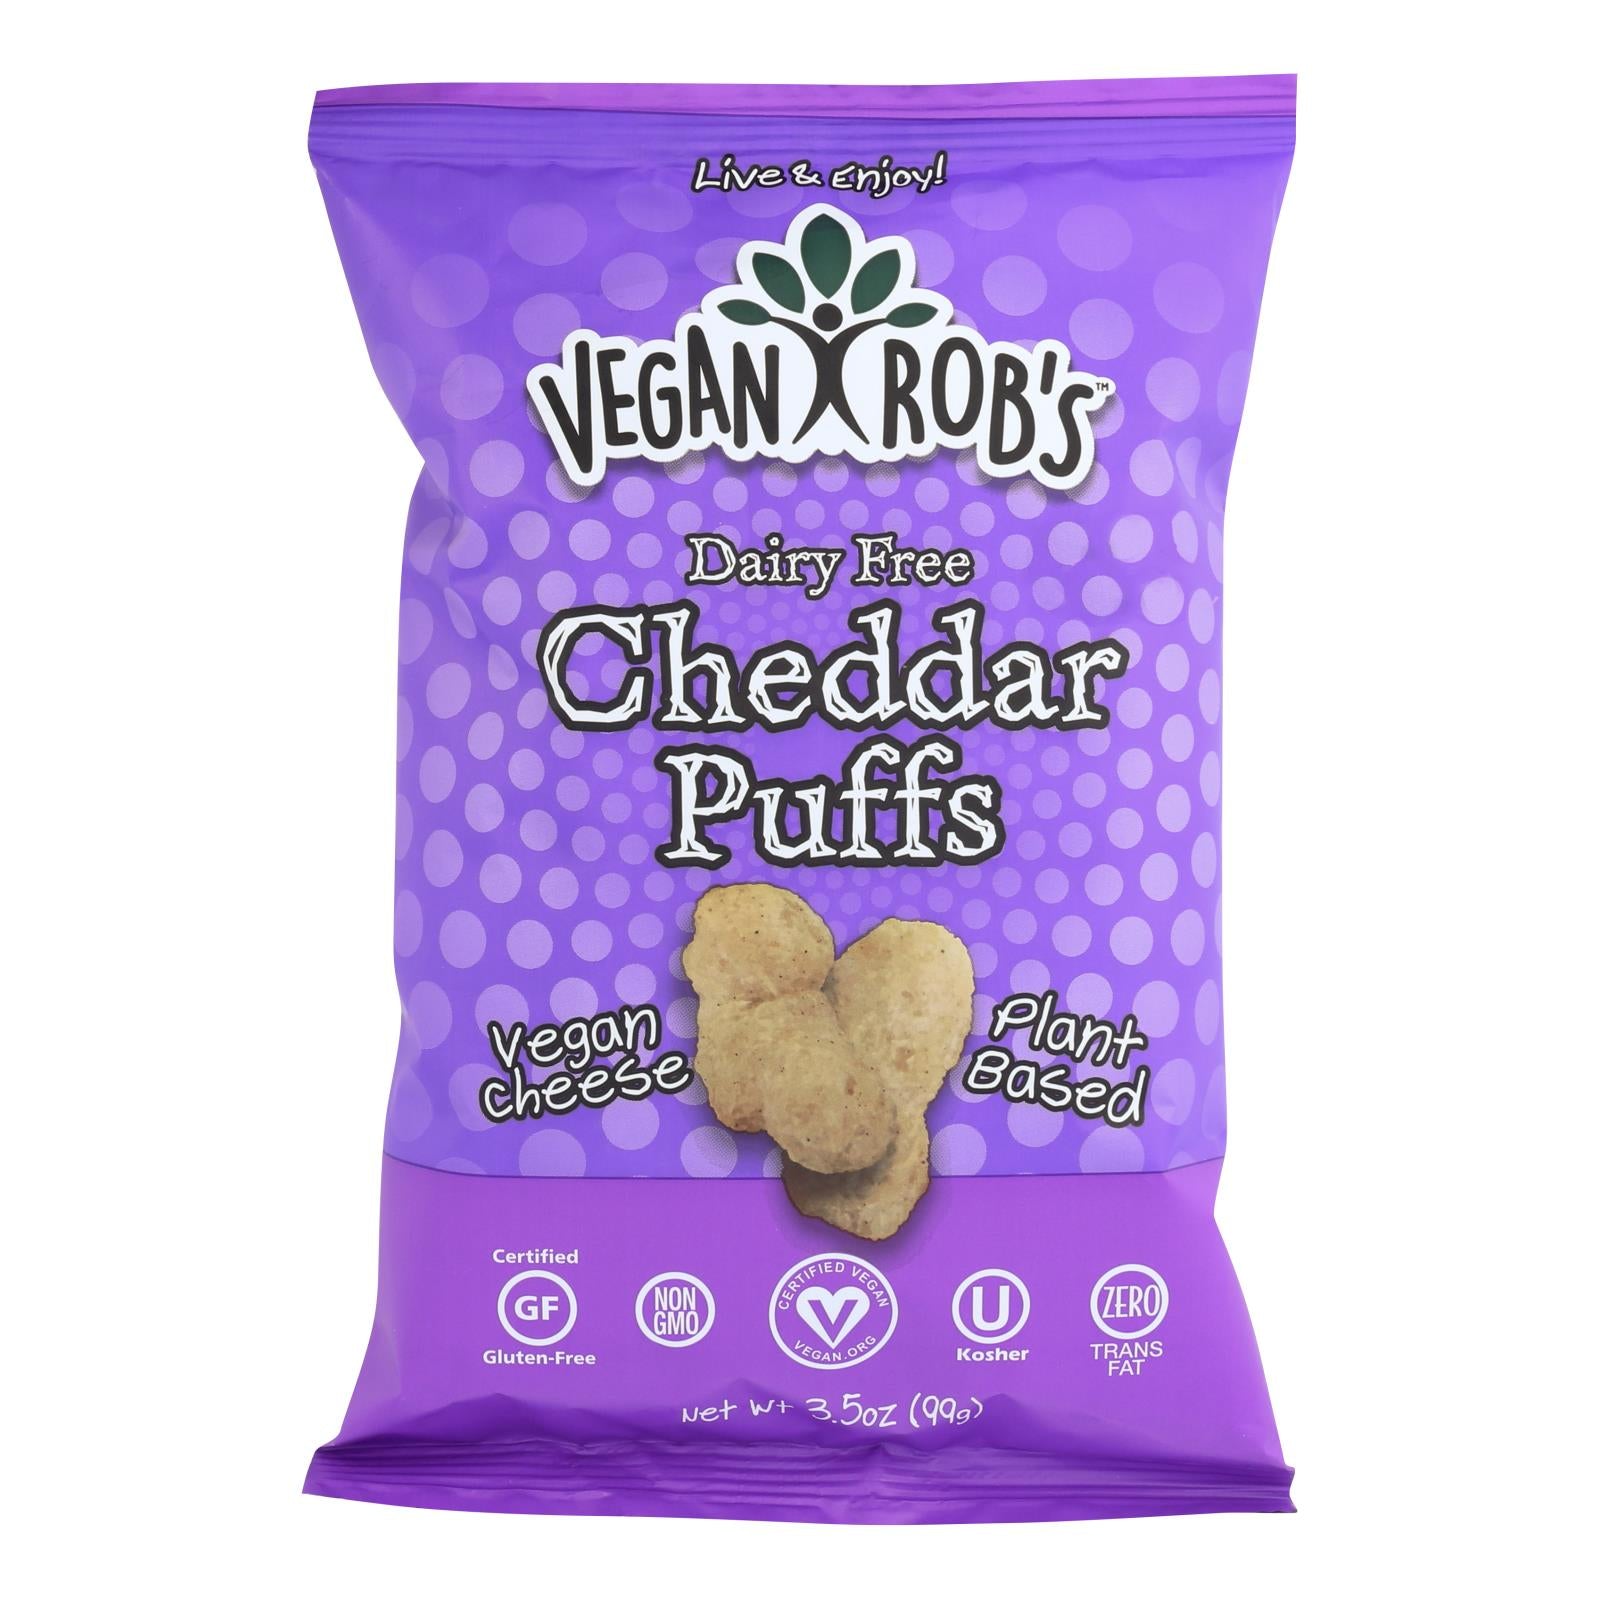 Vegan Rob's Dairy Free Puffs - Cheddar - Case Of 12 - 3.5 Oz - Whole Green Foods